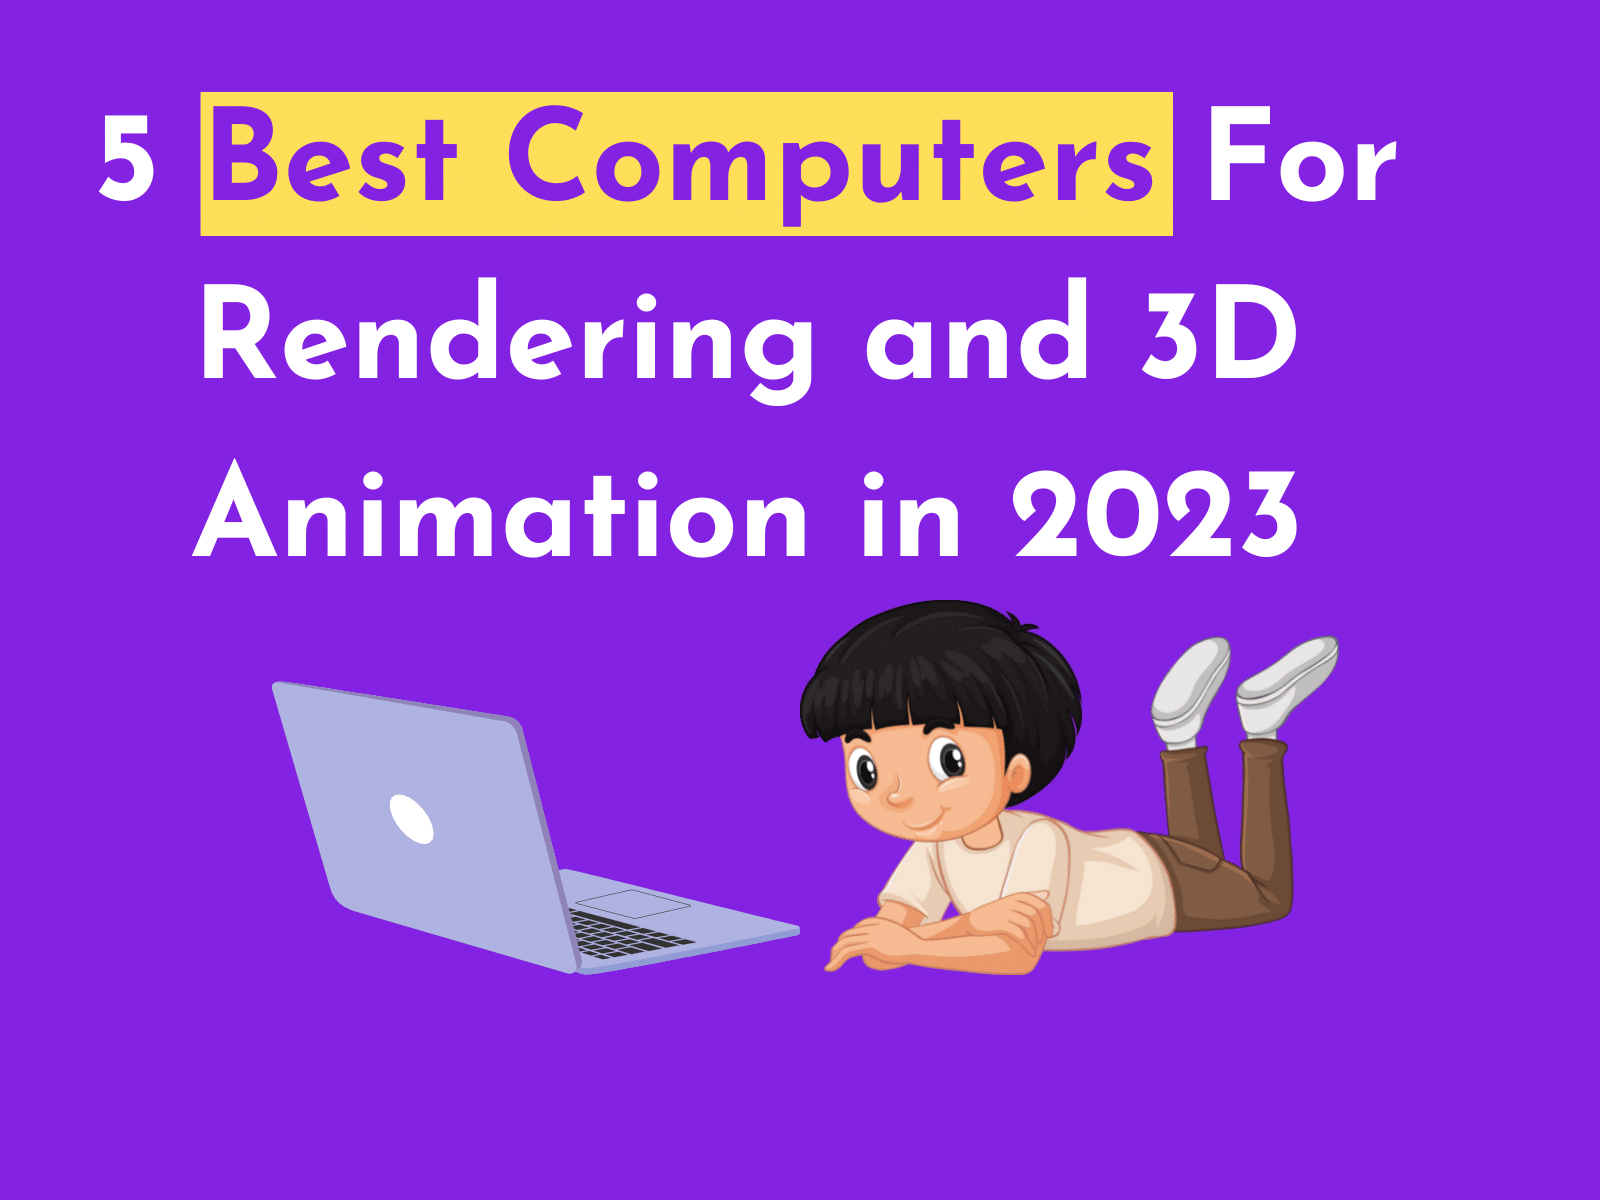 C:\Users\Mohsin\Downloads\5 Best Computers For Rendering and 3D Animation in 2023.png